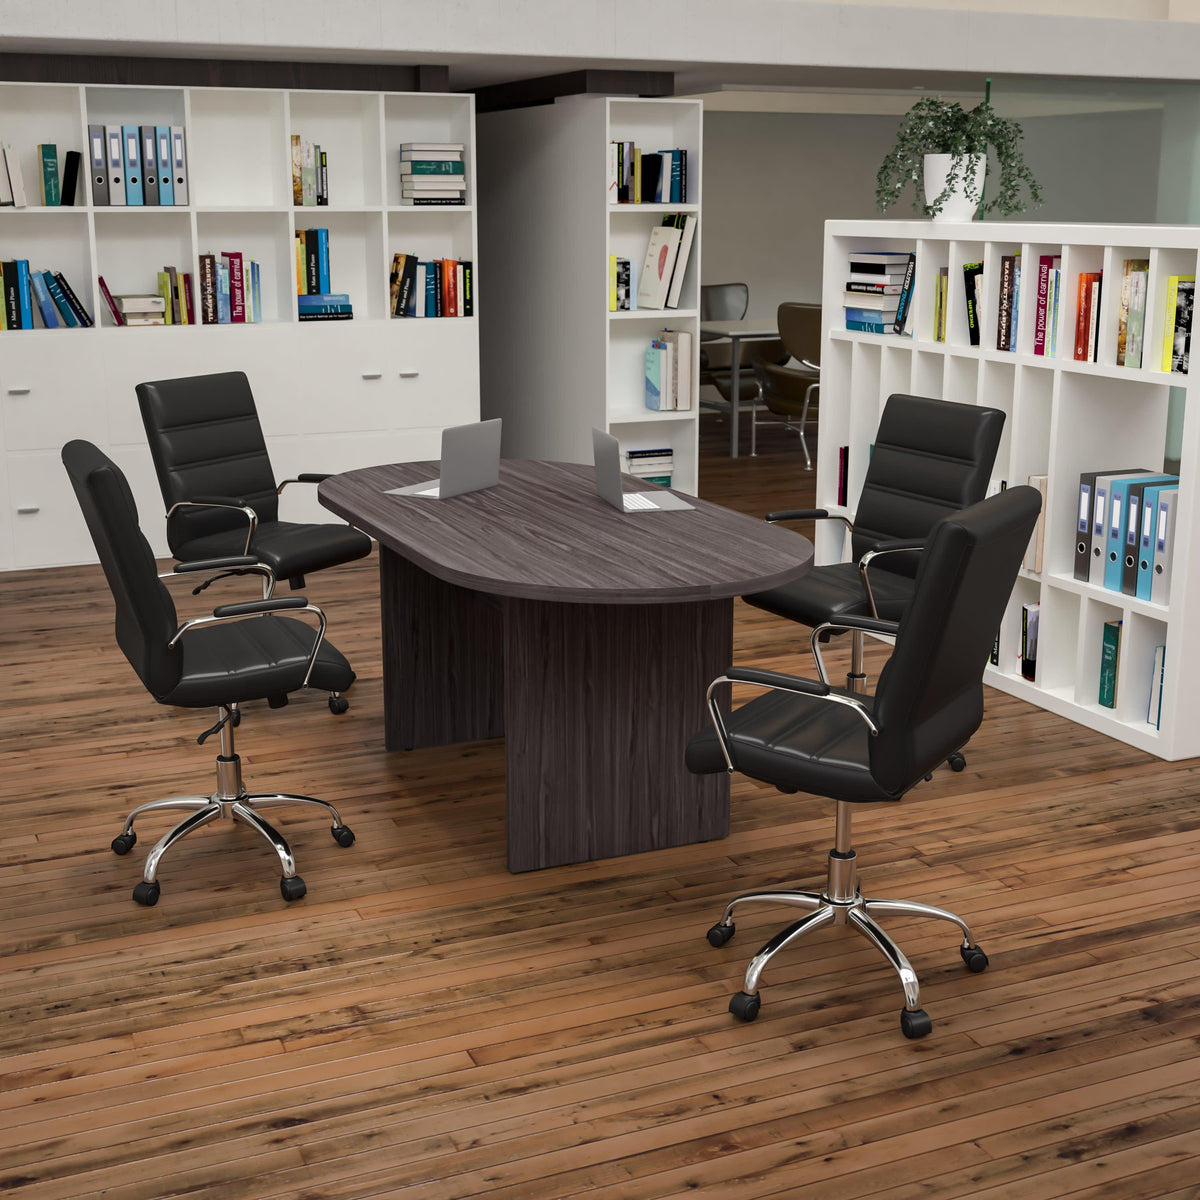 Rustic Gray |#| 5 Piece Rustic Gray Oval Conference Table with 4 Black/Chrome LeatherSoft Chairs